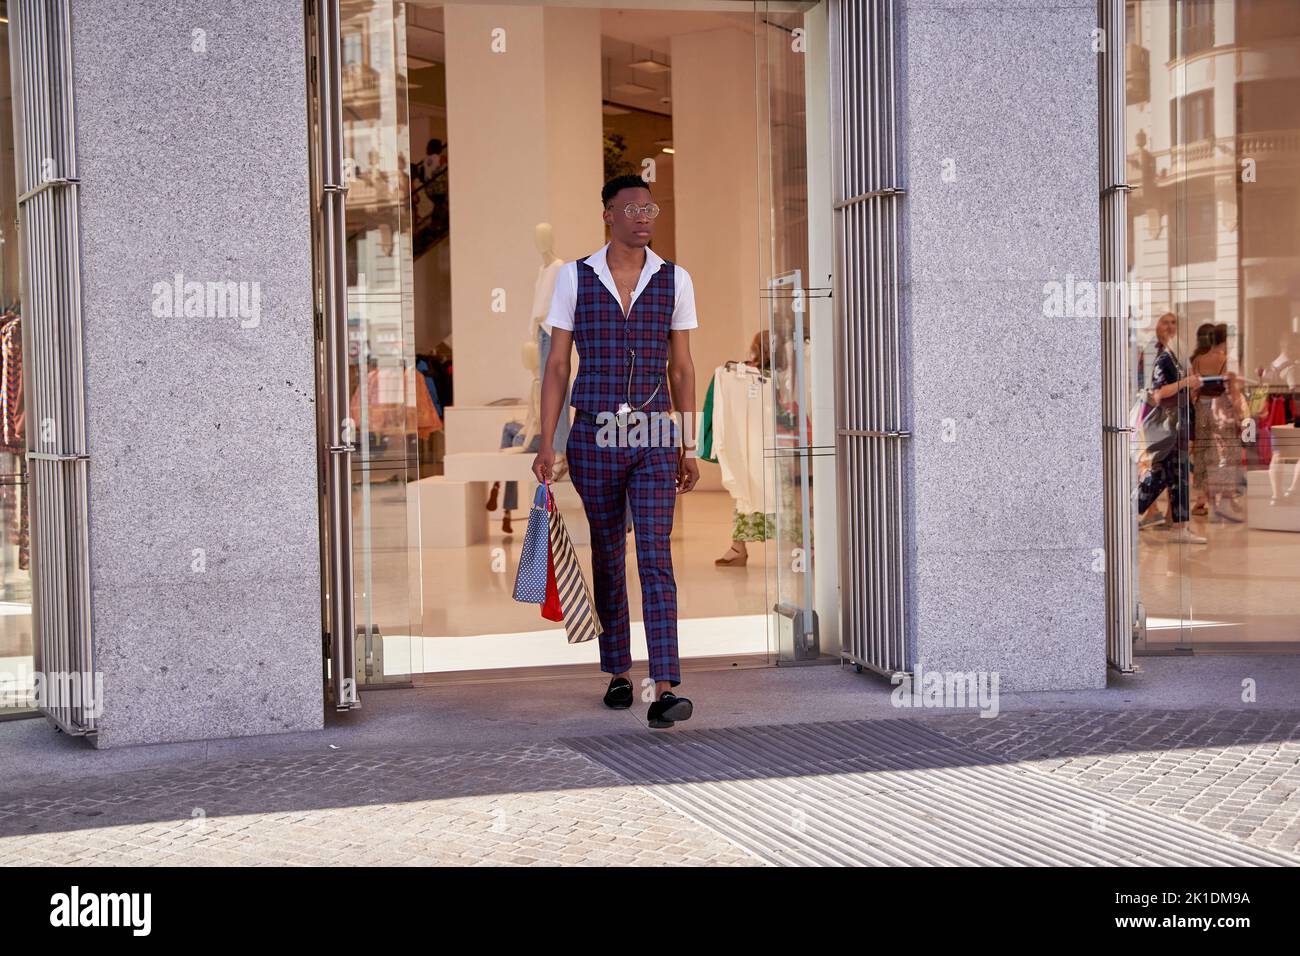 man leaving store with shopping bags Stock Photo